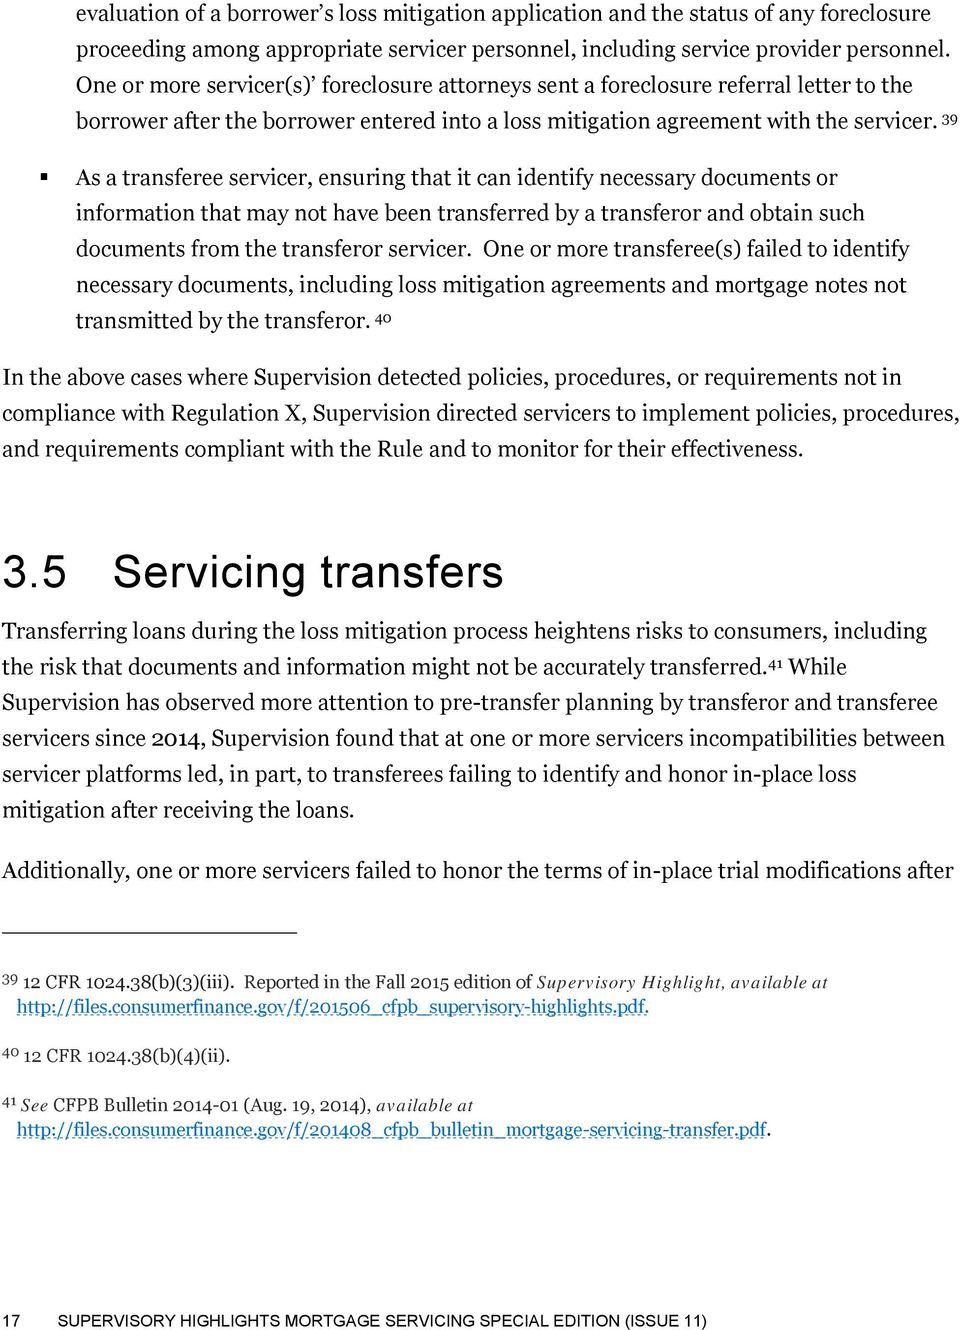 39 As a transferee servicer, ensuring that it can identify necessary documents or information that may not have been transferred by a transferor and obtain such documents from the transferor servicer.